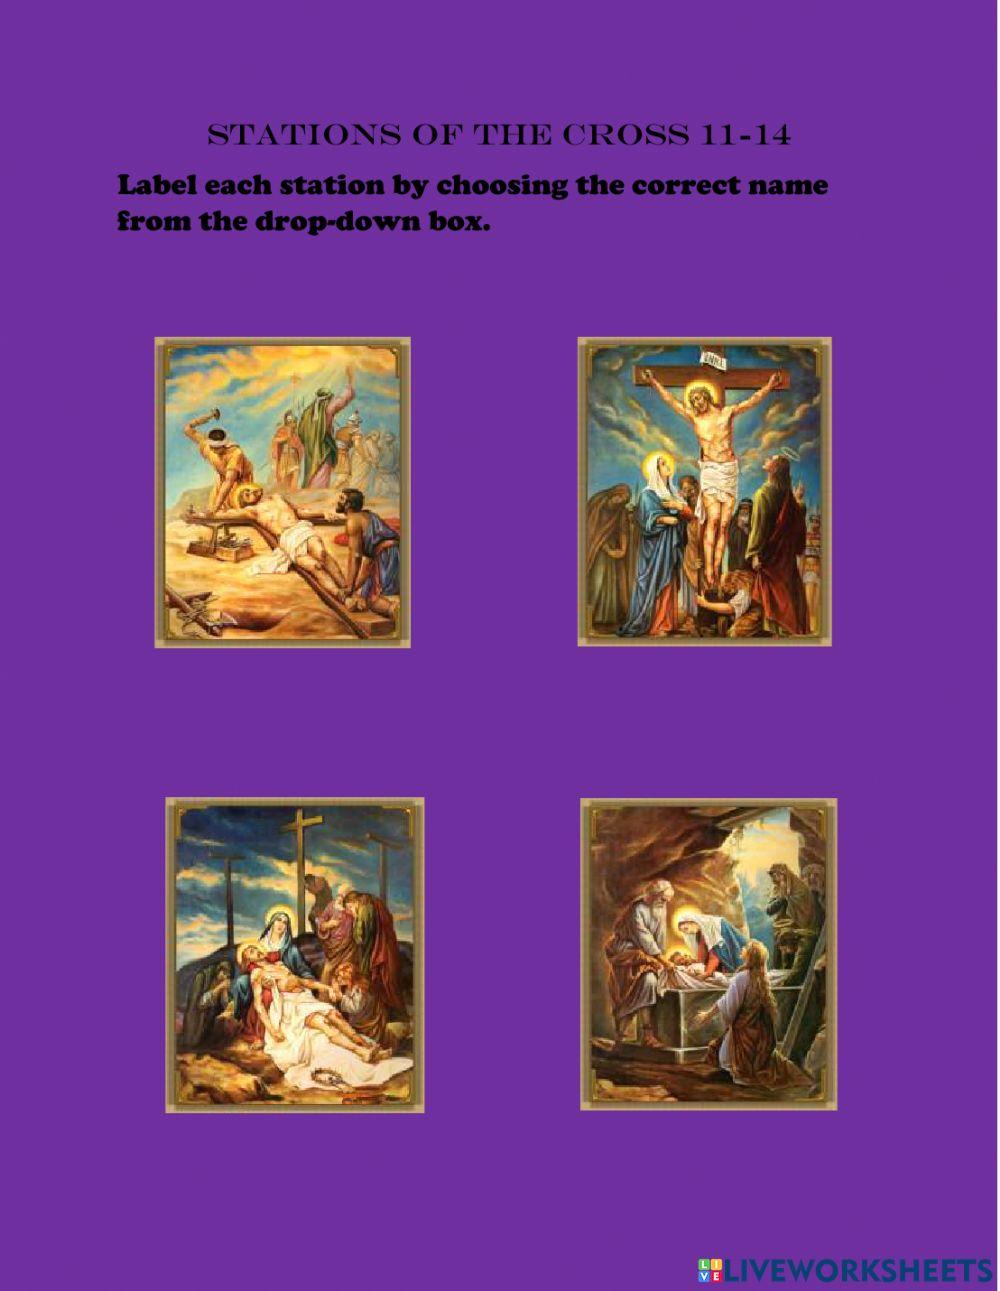 Stations of the cross 11-14